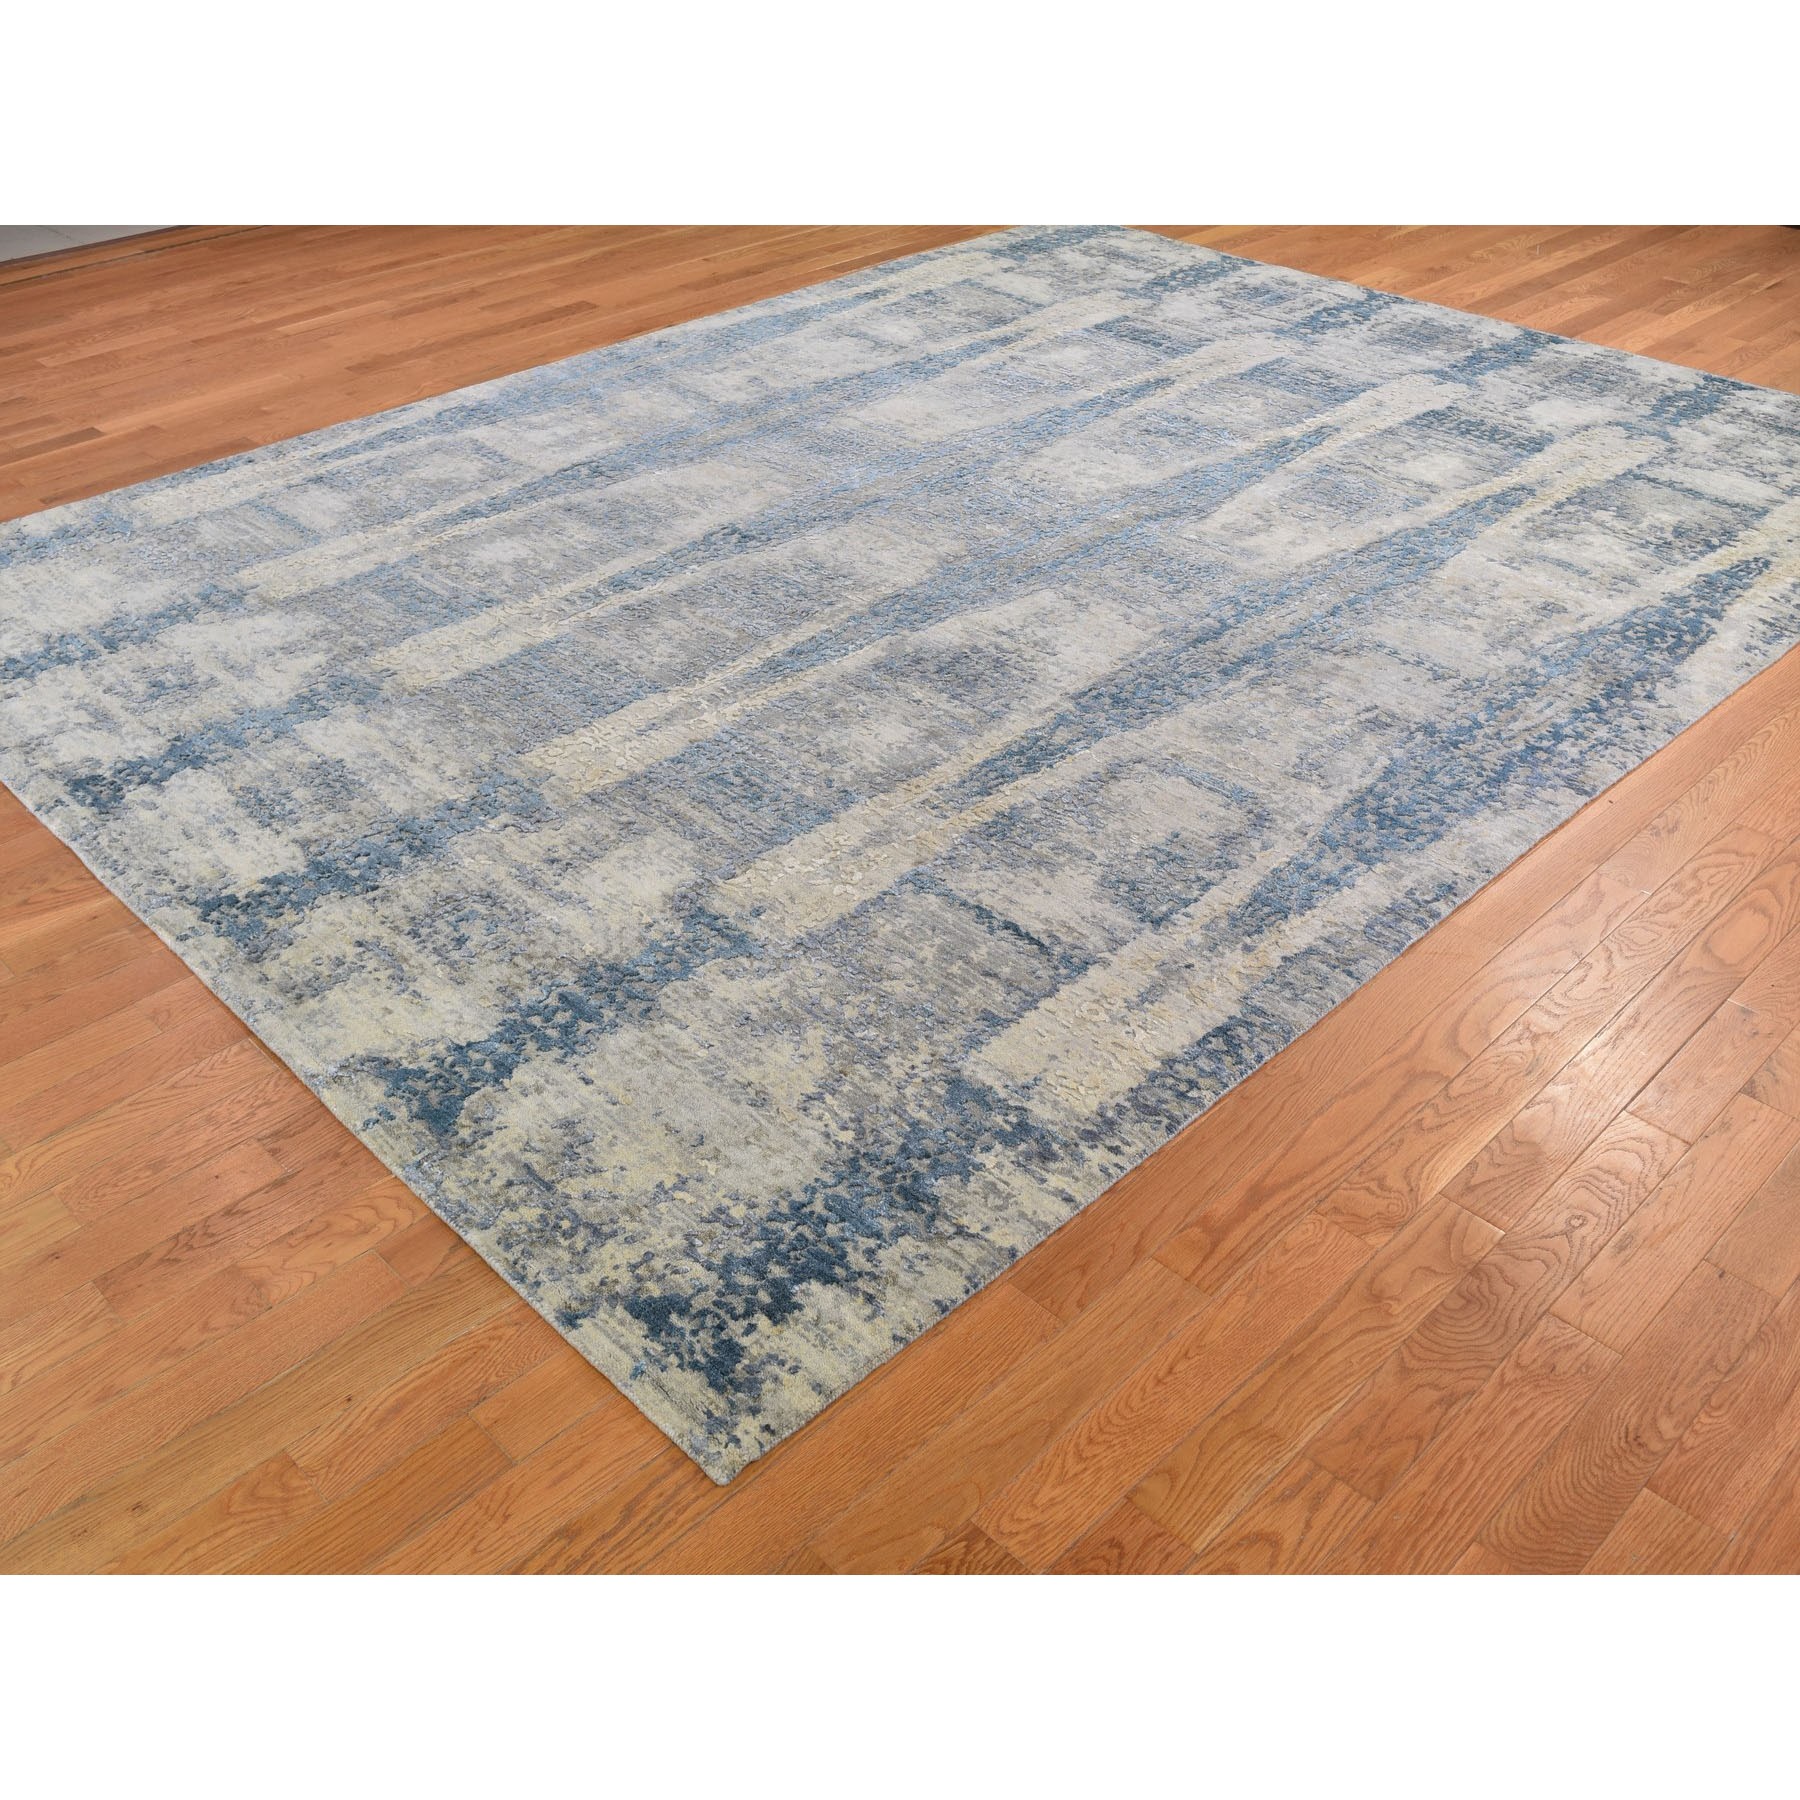 8-10 x11-10  THE EXPANDING TUBE Wool And Silk Denser Weave Hand Knotted Oriental Rug 